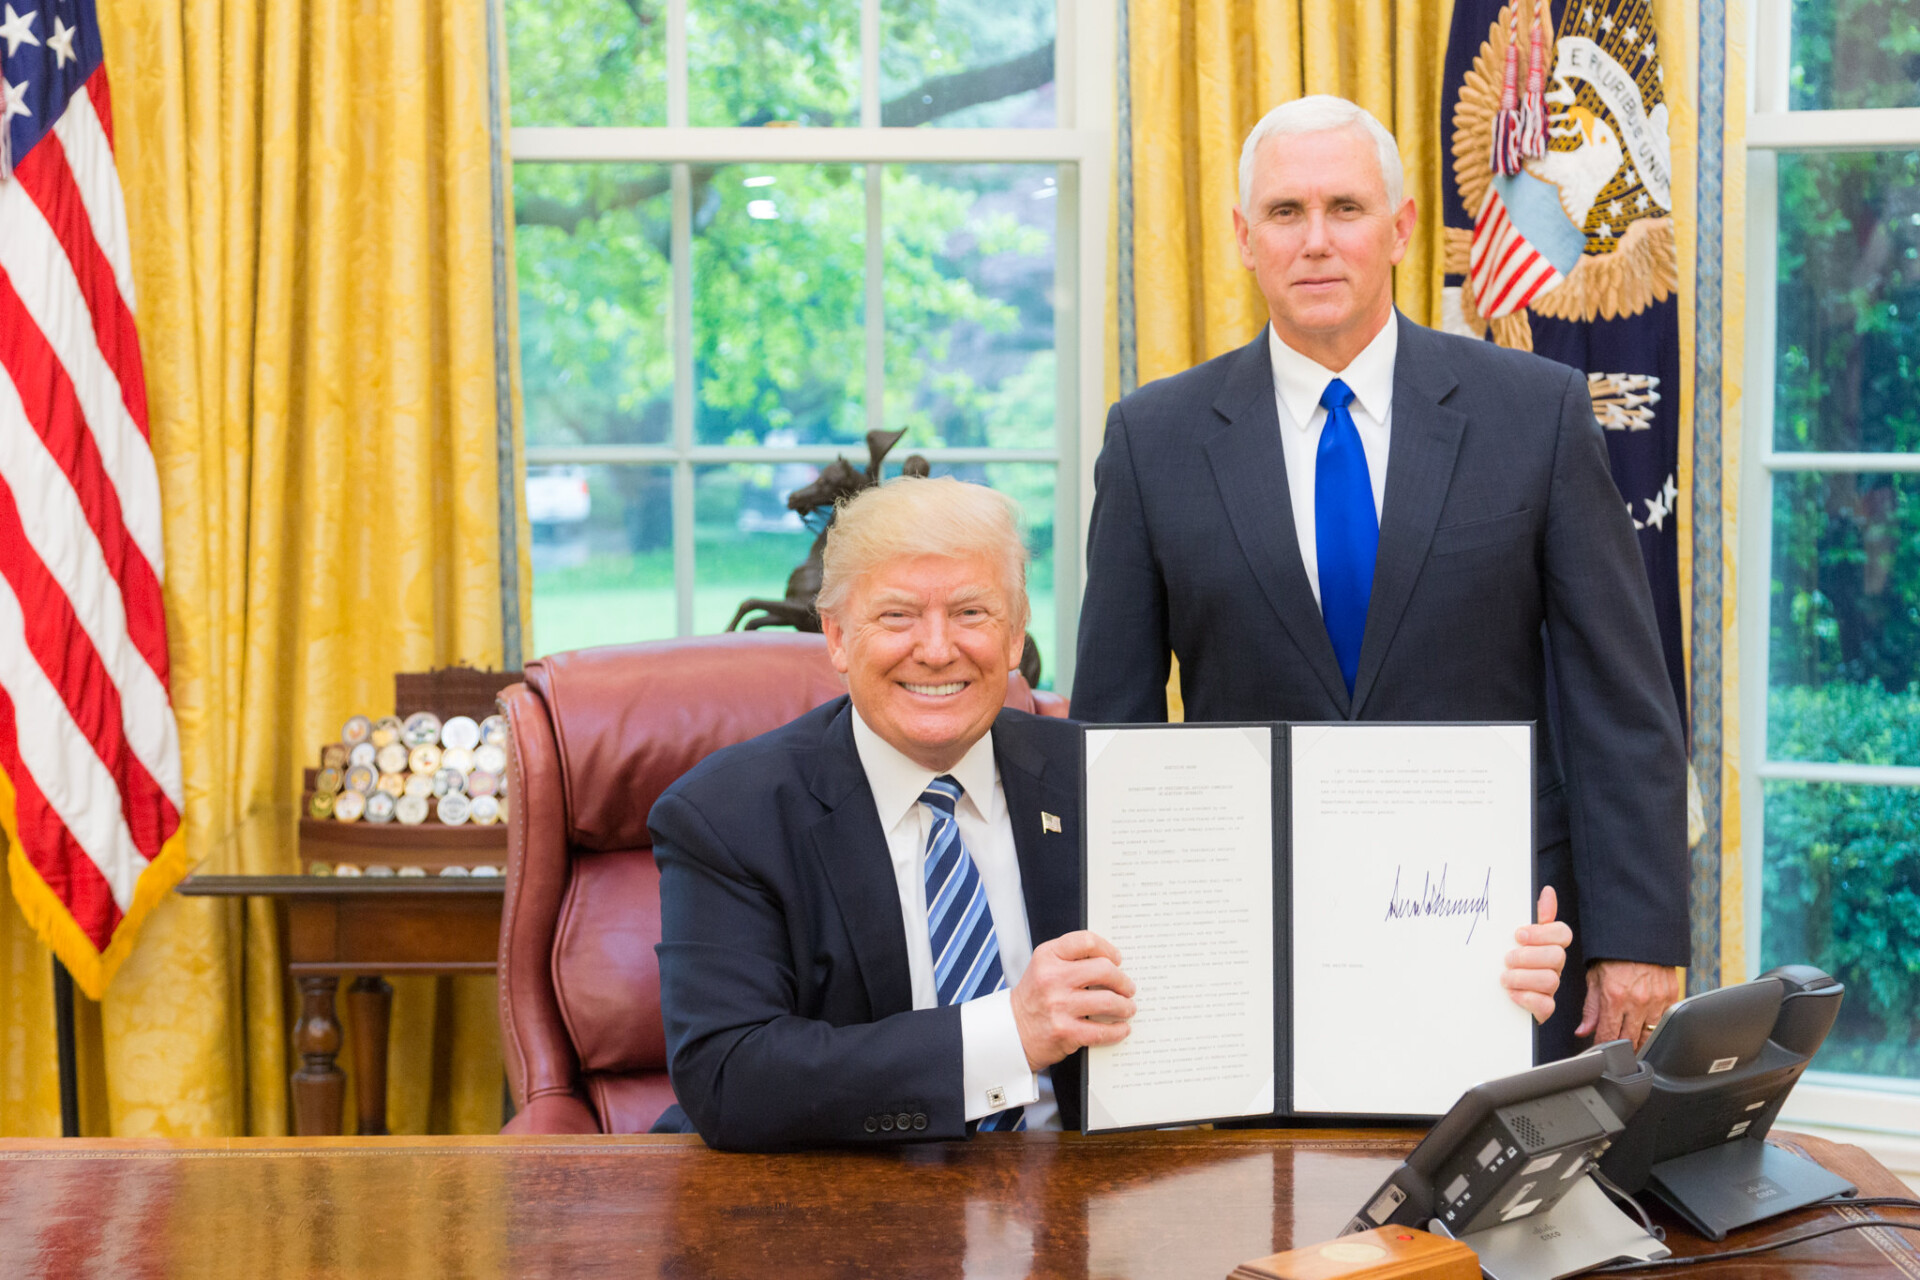 "President Trump is joined by Vice President Pence for an Executive Order signing" by The White House is marked with Public Domain Mark 1.0.